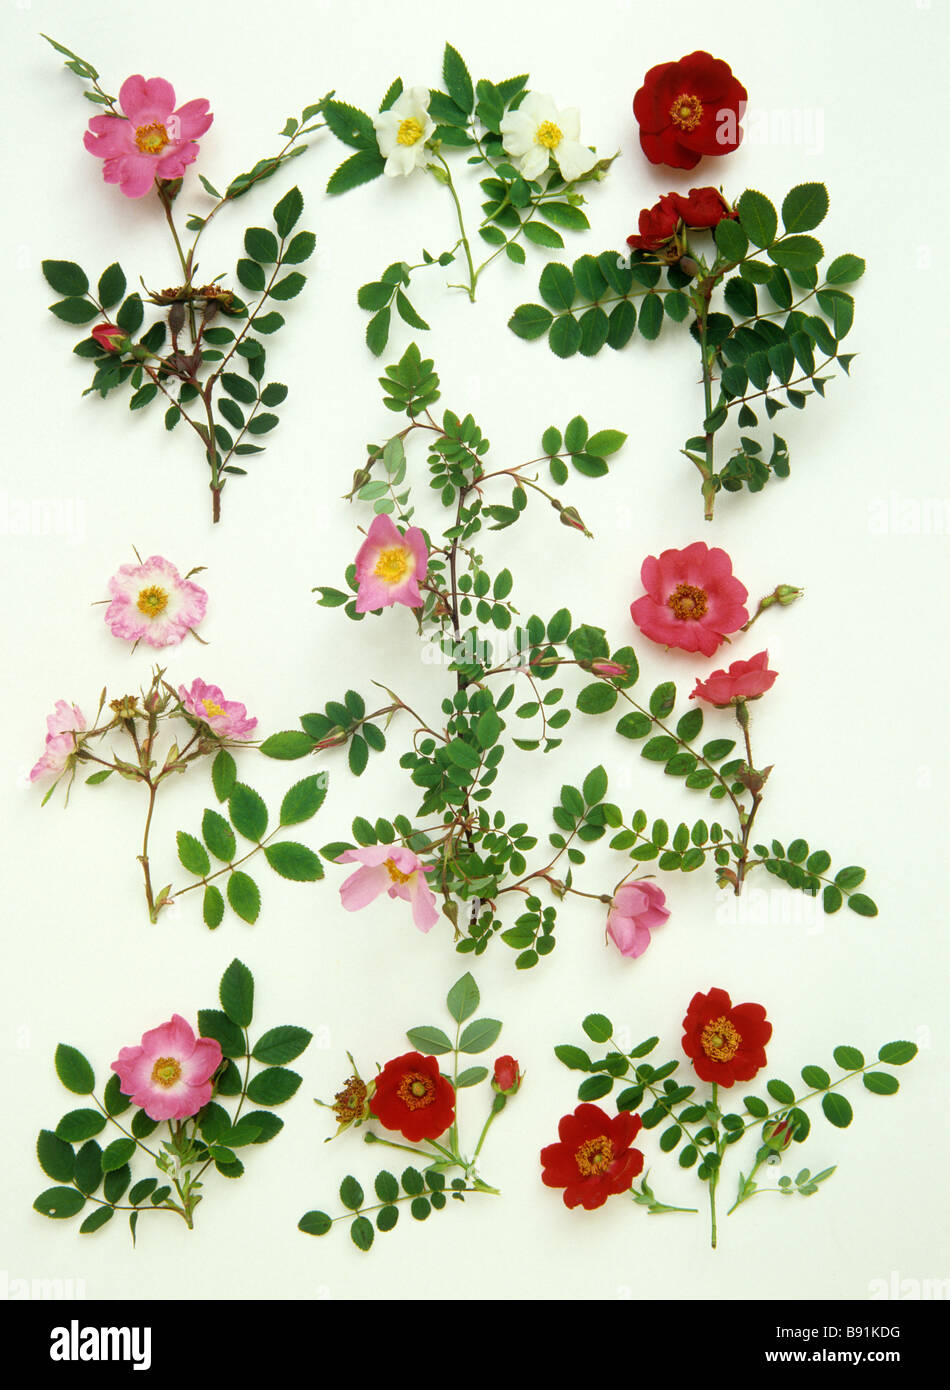 Old and wild rose collection - Specimens from the Gardens of the Rose – June 25th Stock Photo